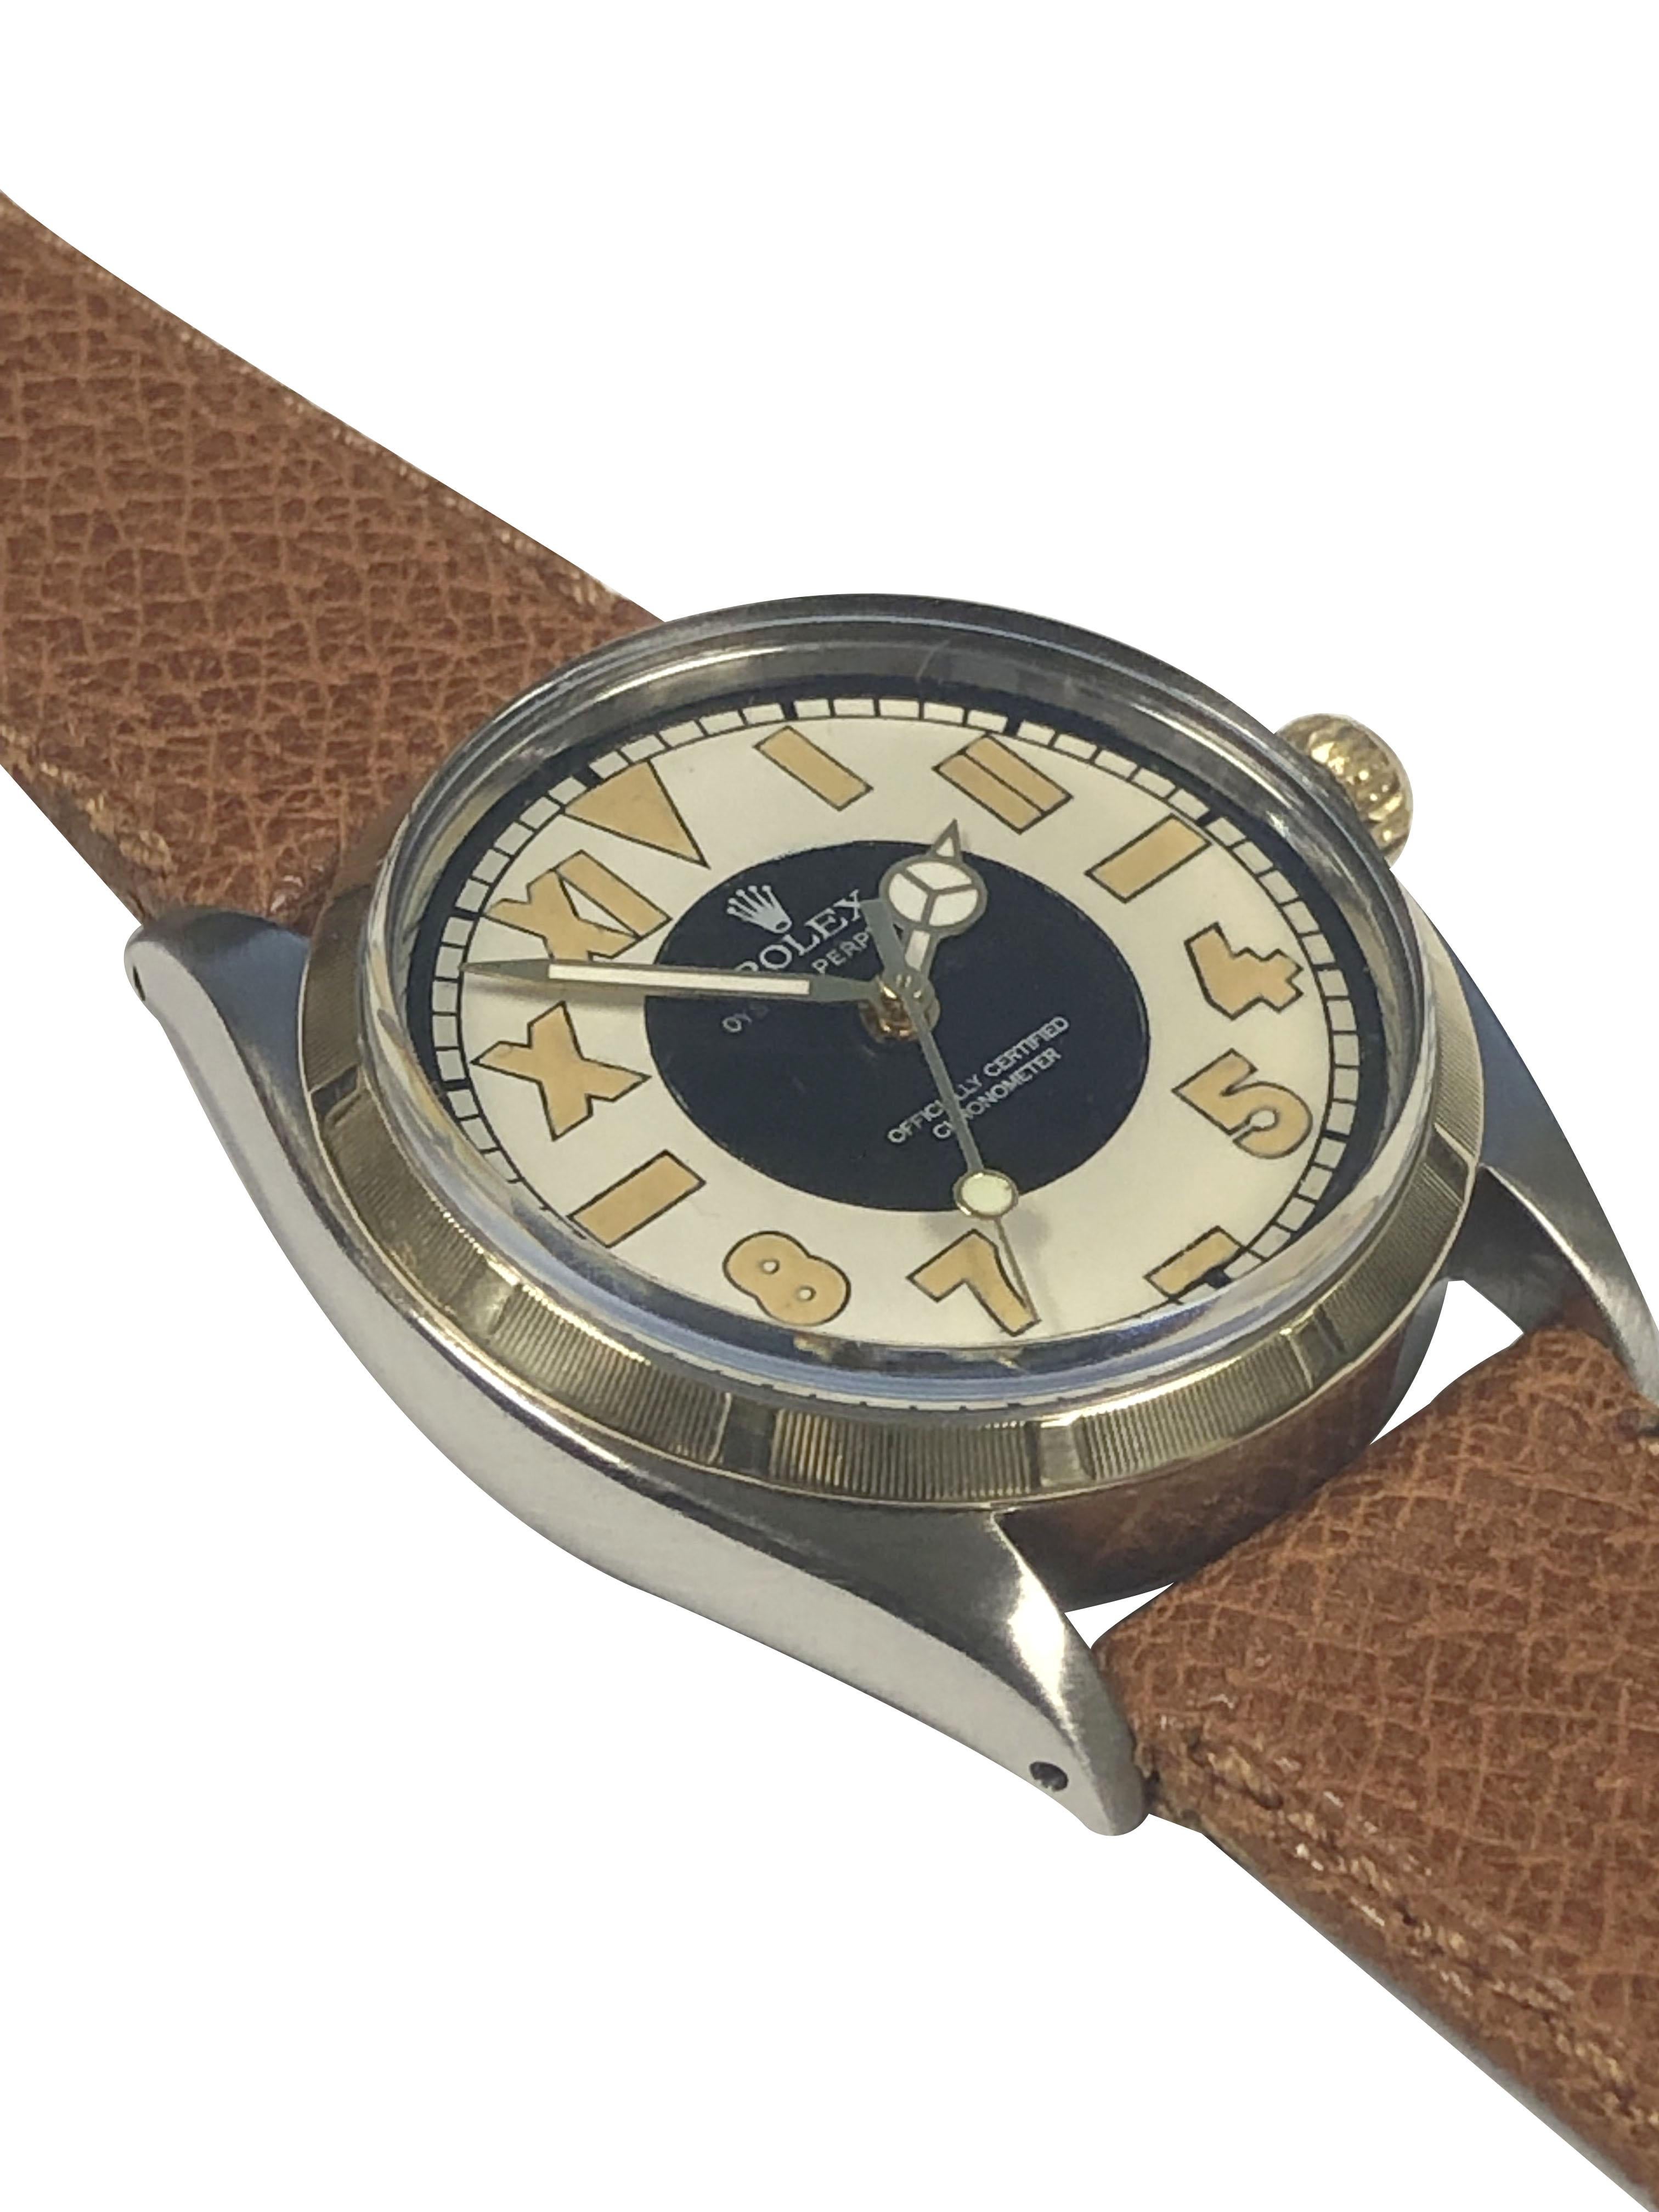 Circa 1950 Rolex Oyster Perpetual Reference 6565 Wrist Watch, 34 M.M. Stainless Steel 3 piece Oyster case with an Engine turned 14k Yellow Gold Bezel. Caliber 1560 Automatic, self winding Nickle Lever movement, Gold Rolex Logo Crown. New Custom